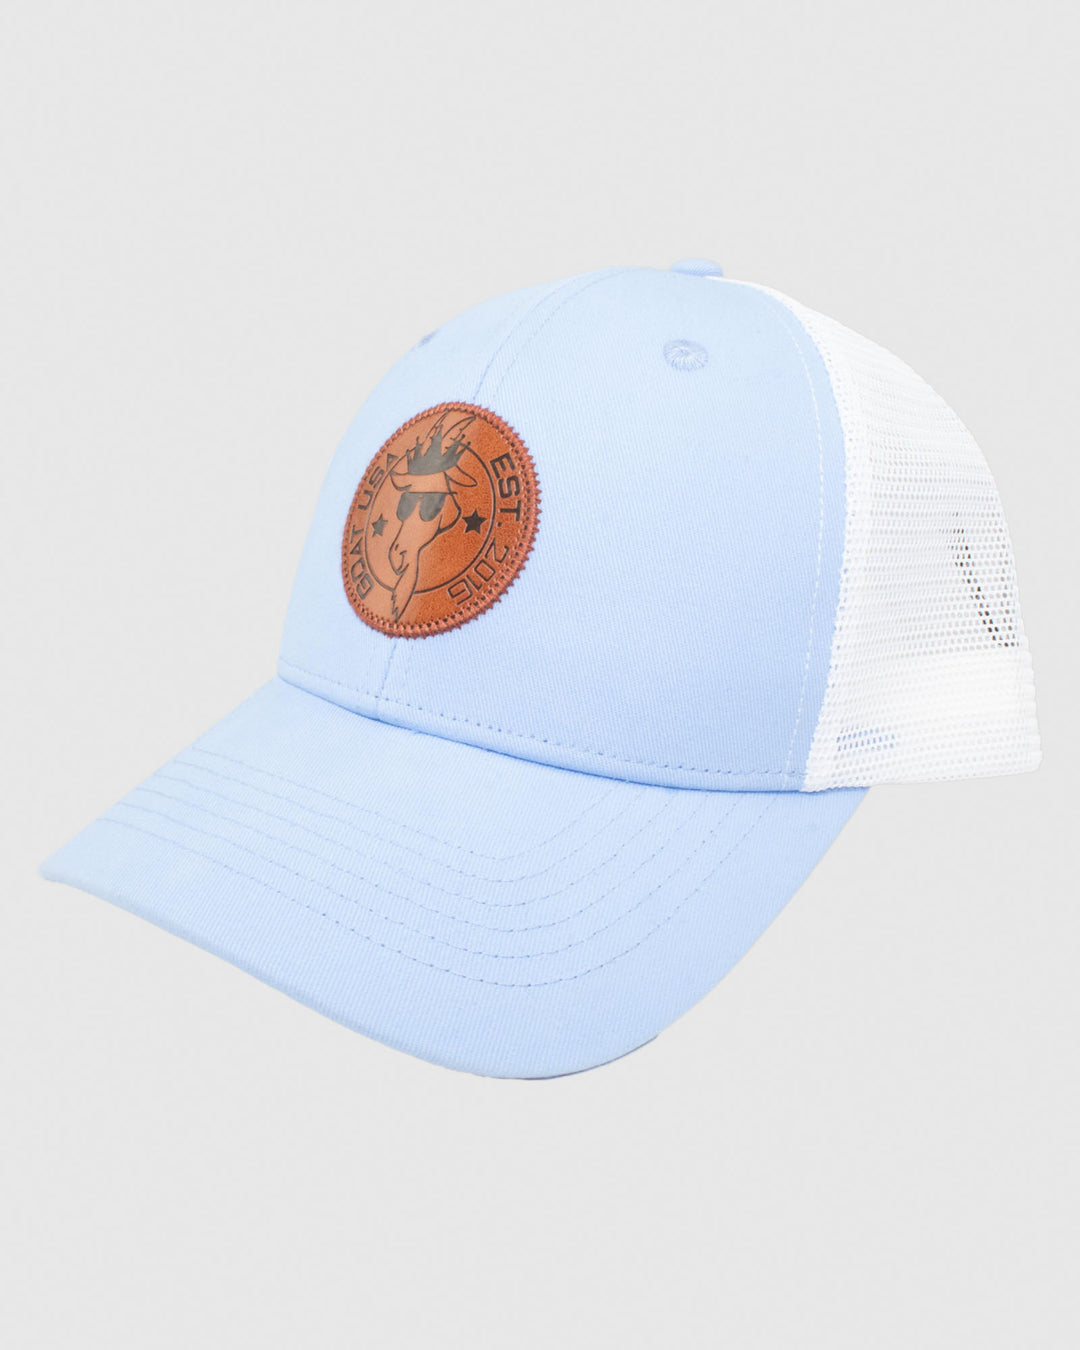 Carolina blue hat with white mesh and brown leather patch#color_carolina-blue